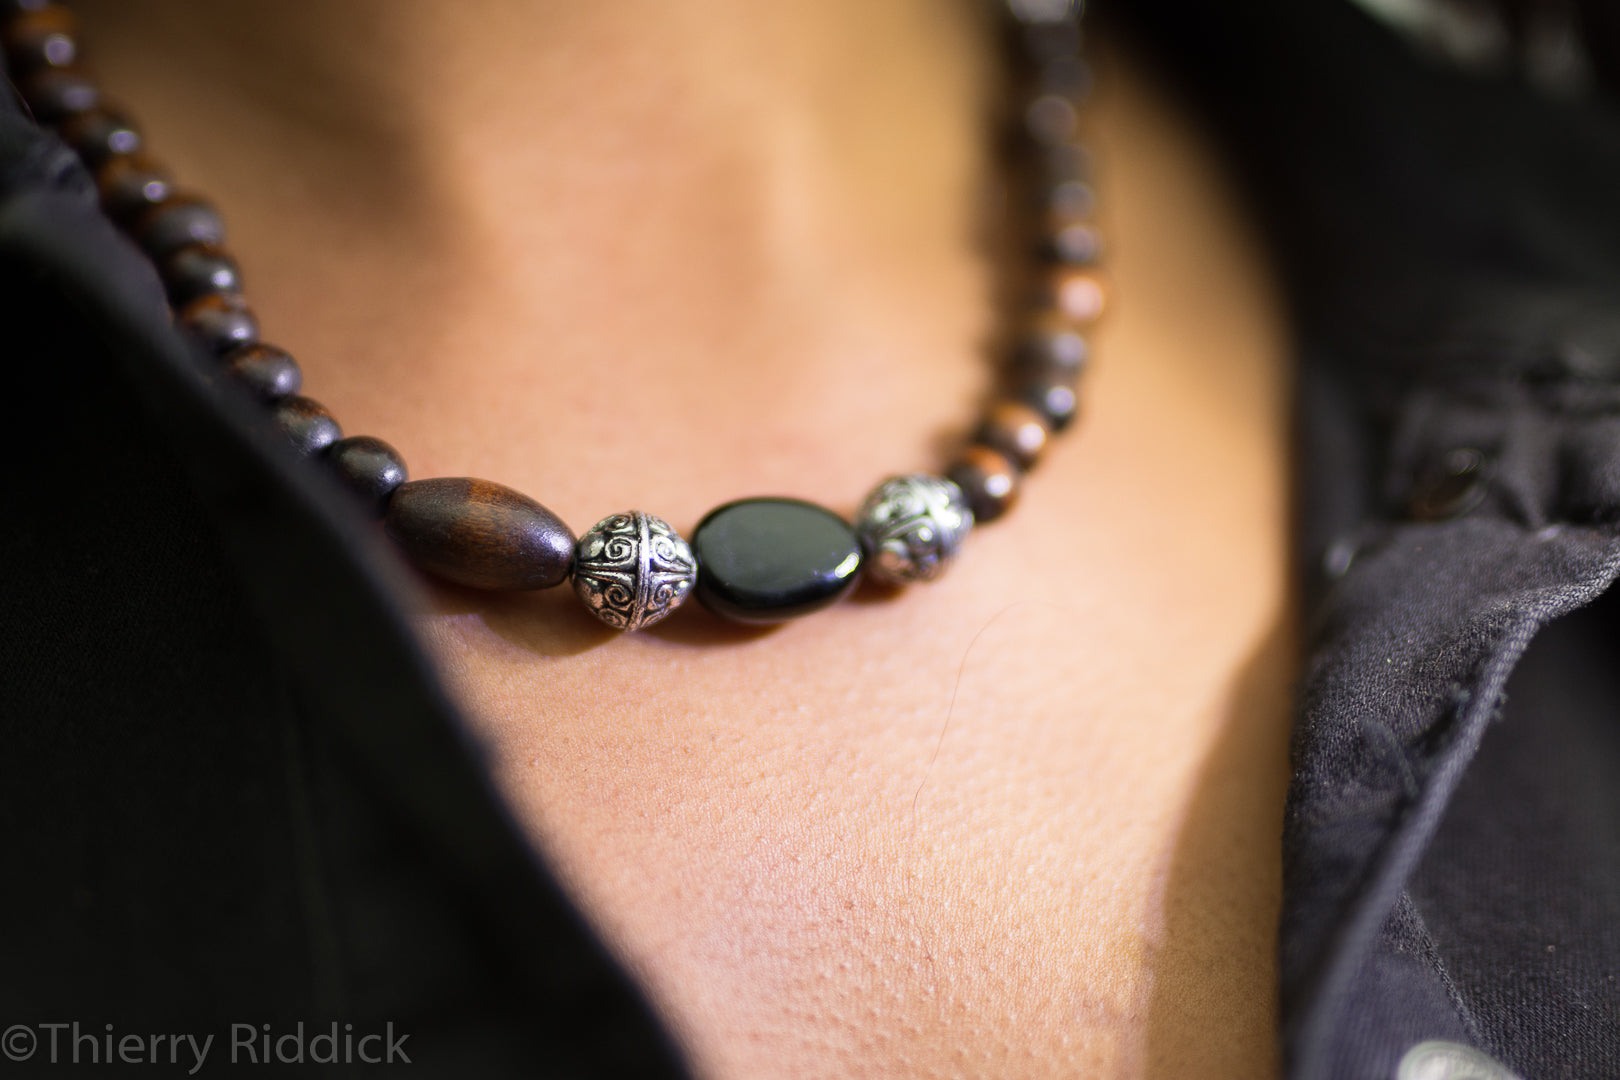 Jewel Noelya I.- Necklace with 2 different pearls with black stone